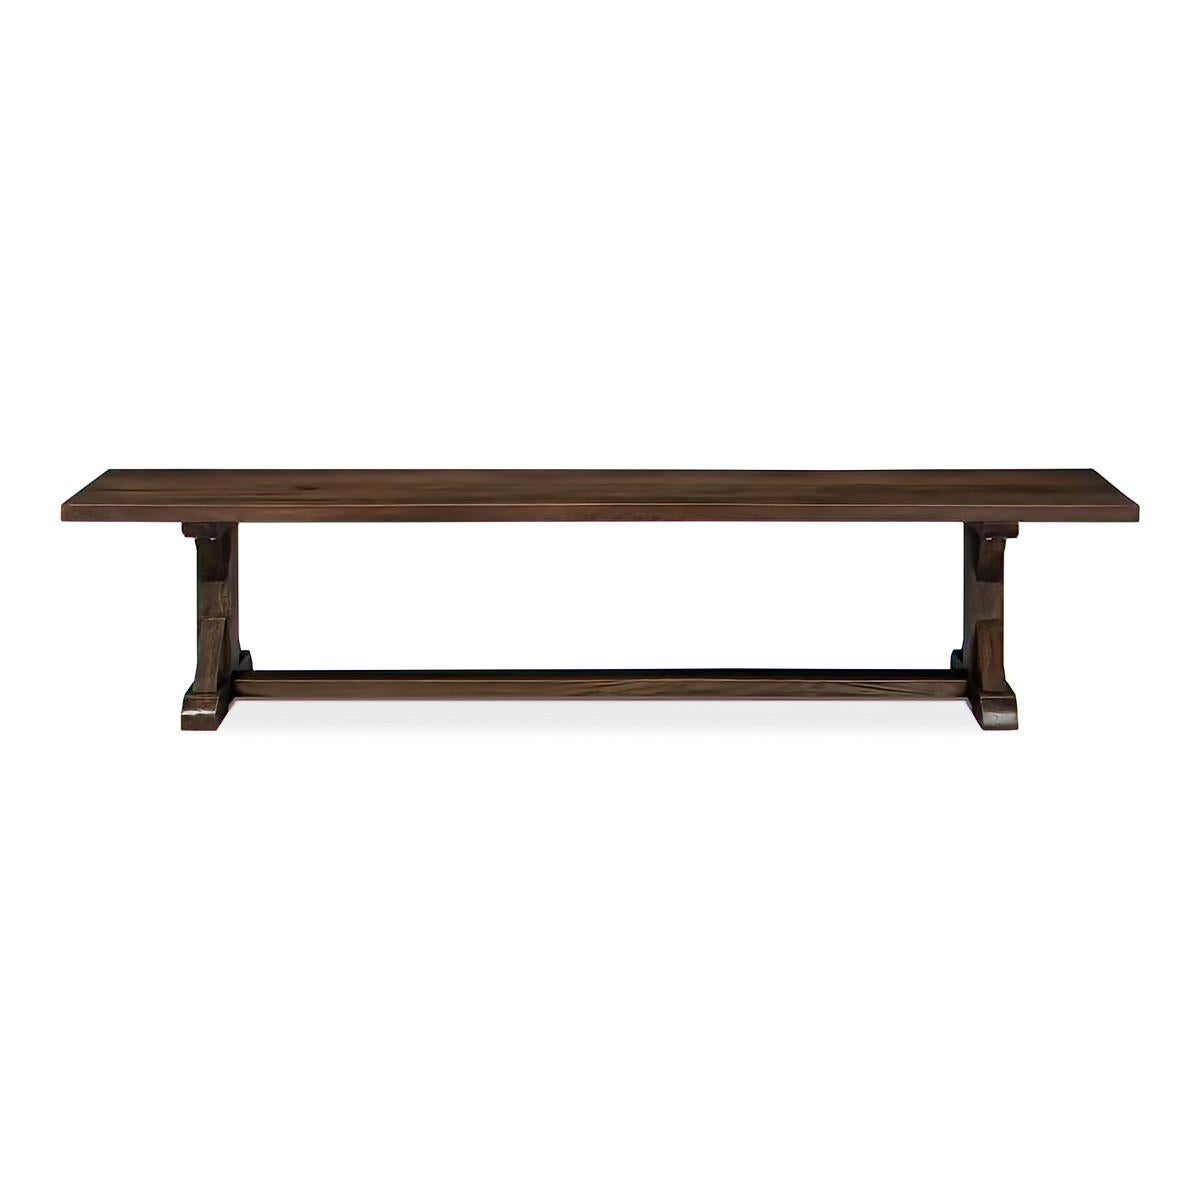 The Rustic Farmhouse bench is made of reclaimed wood and is a wonderful addition to the hallway or by the foot of the bed. In a walnut finish and at 88